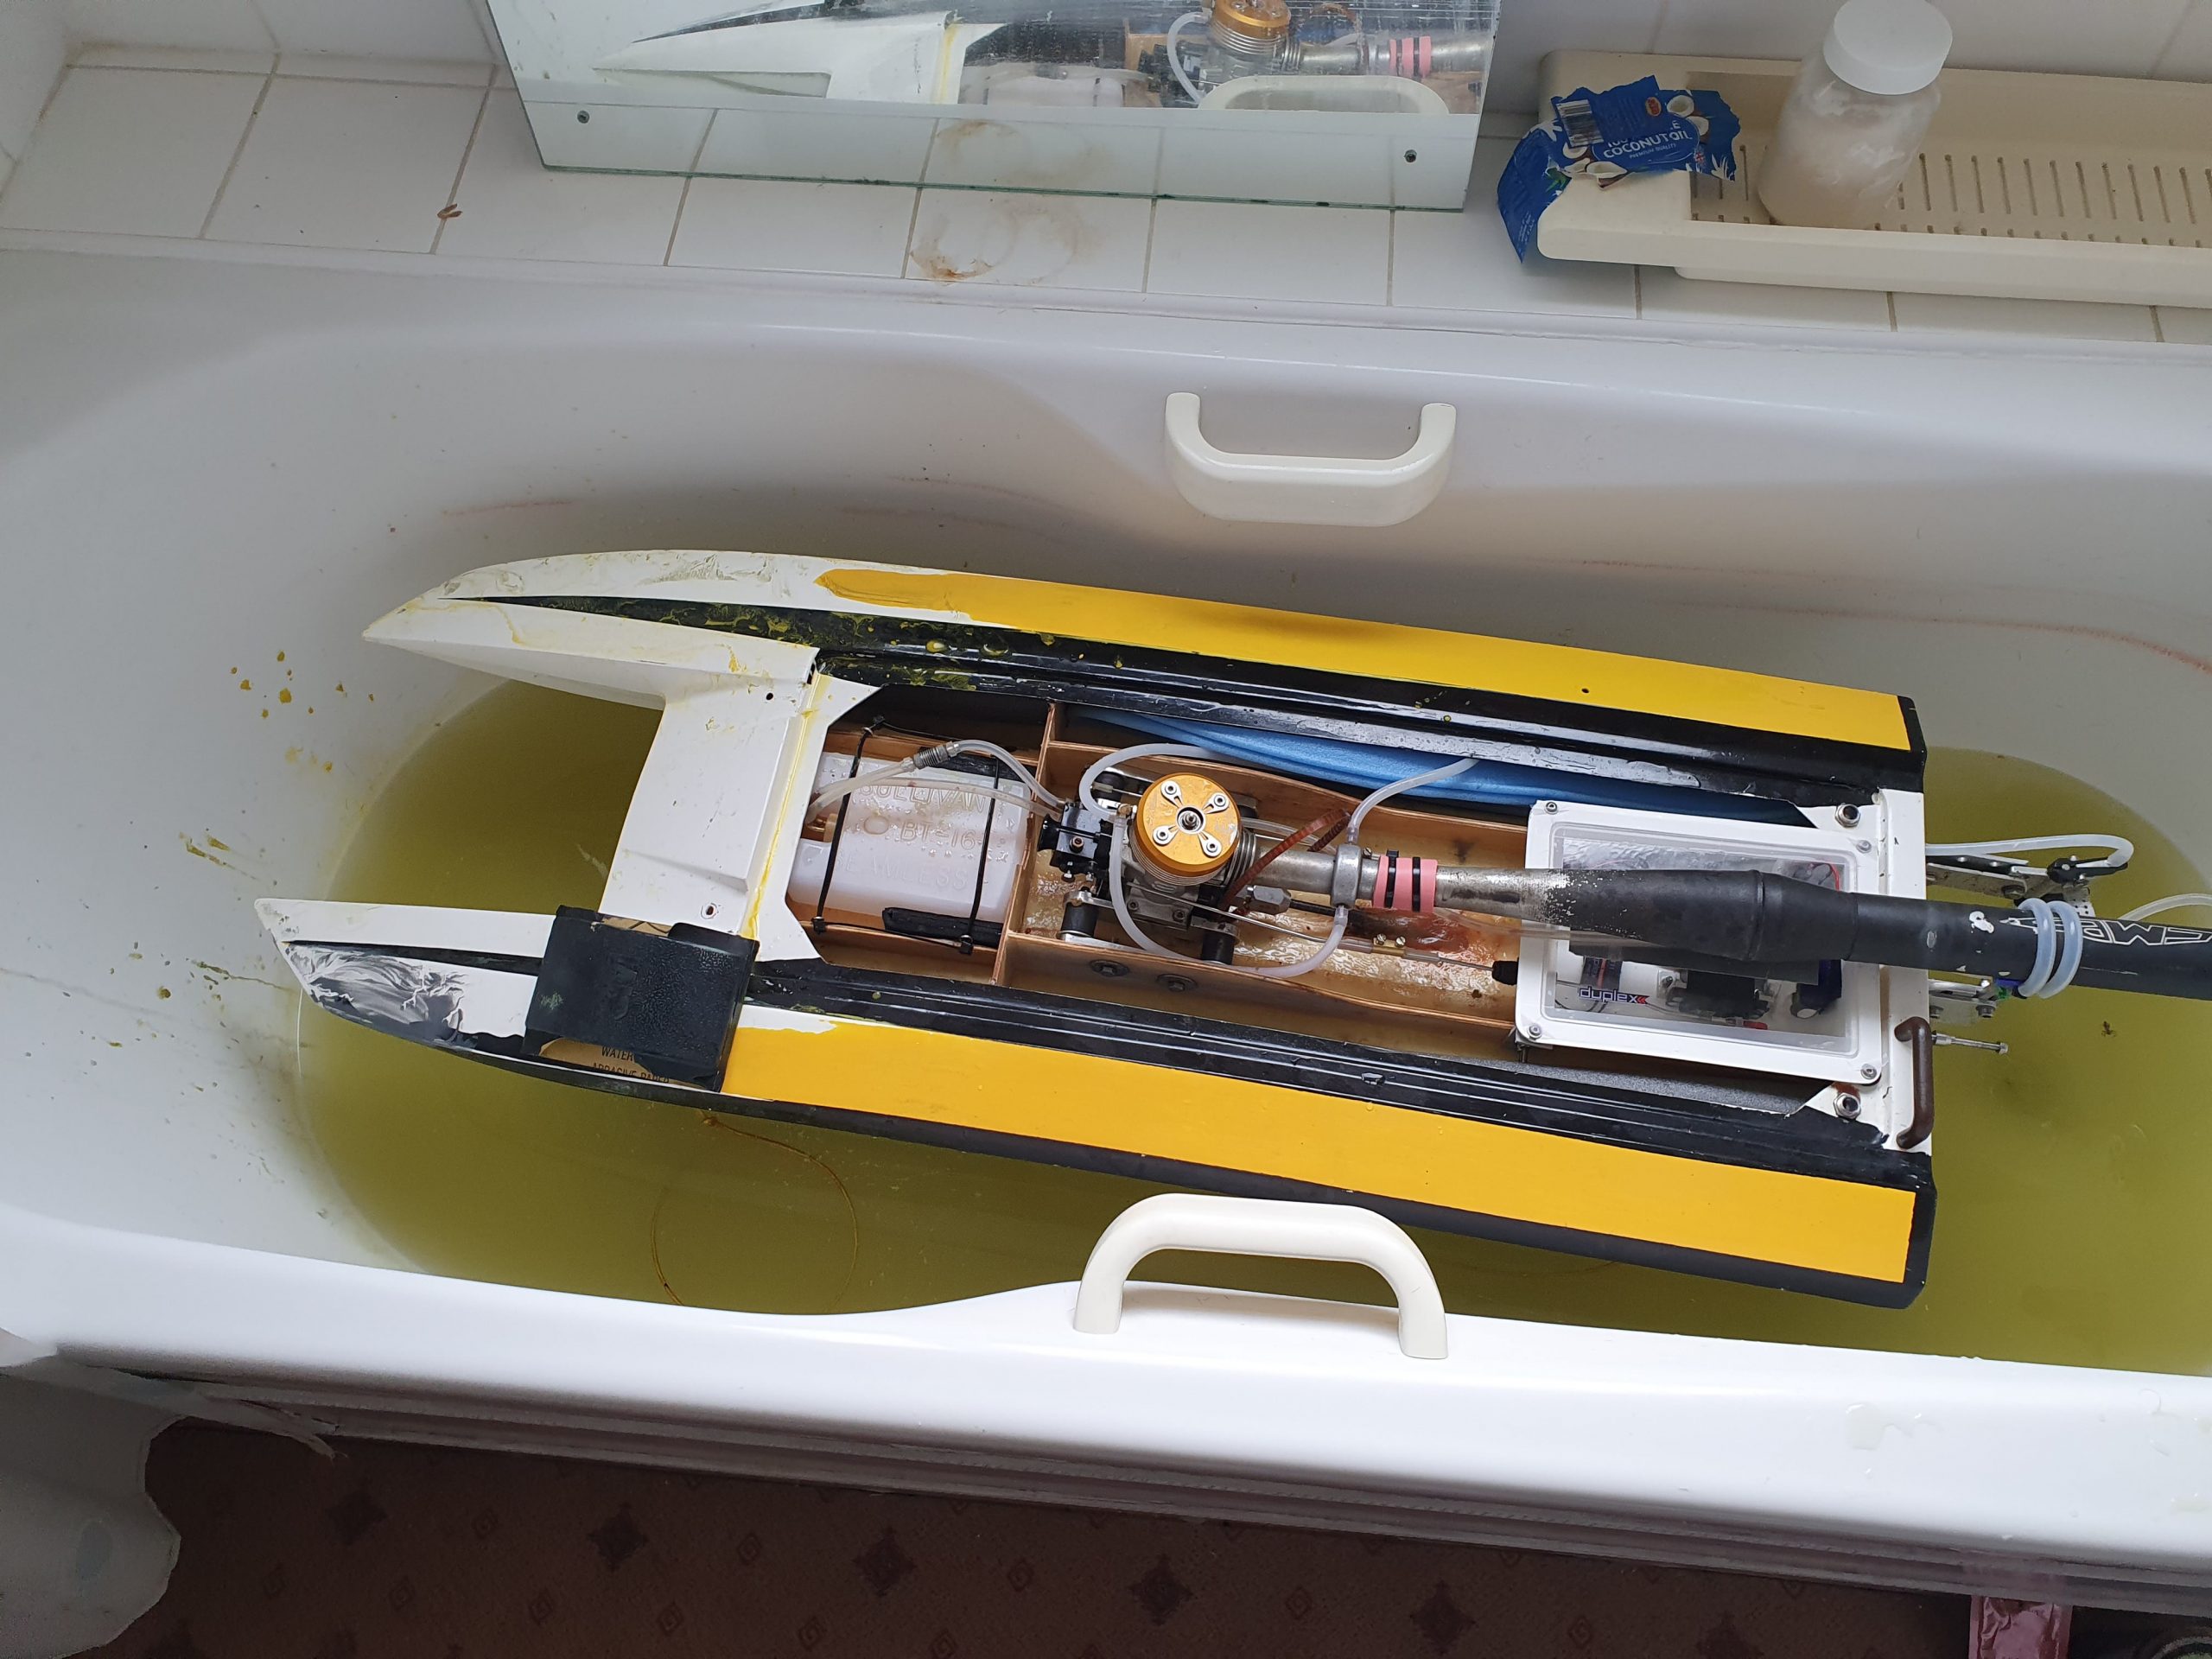 cleaning model boat